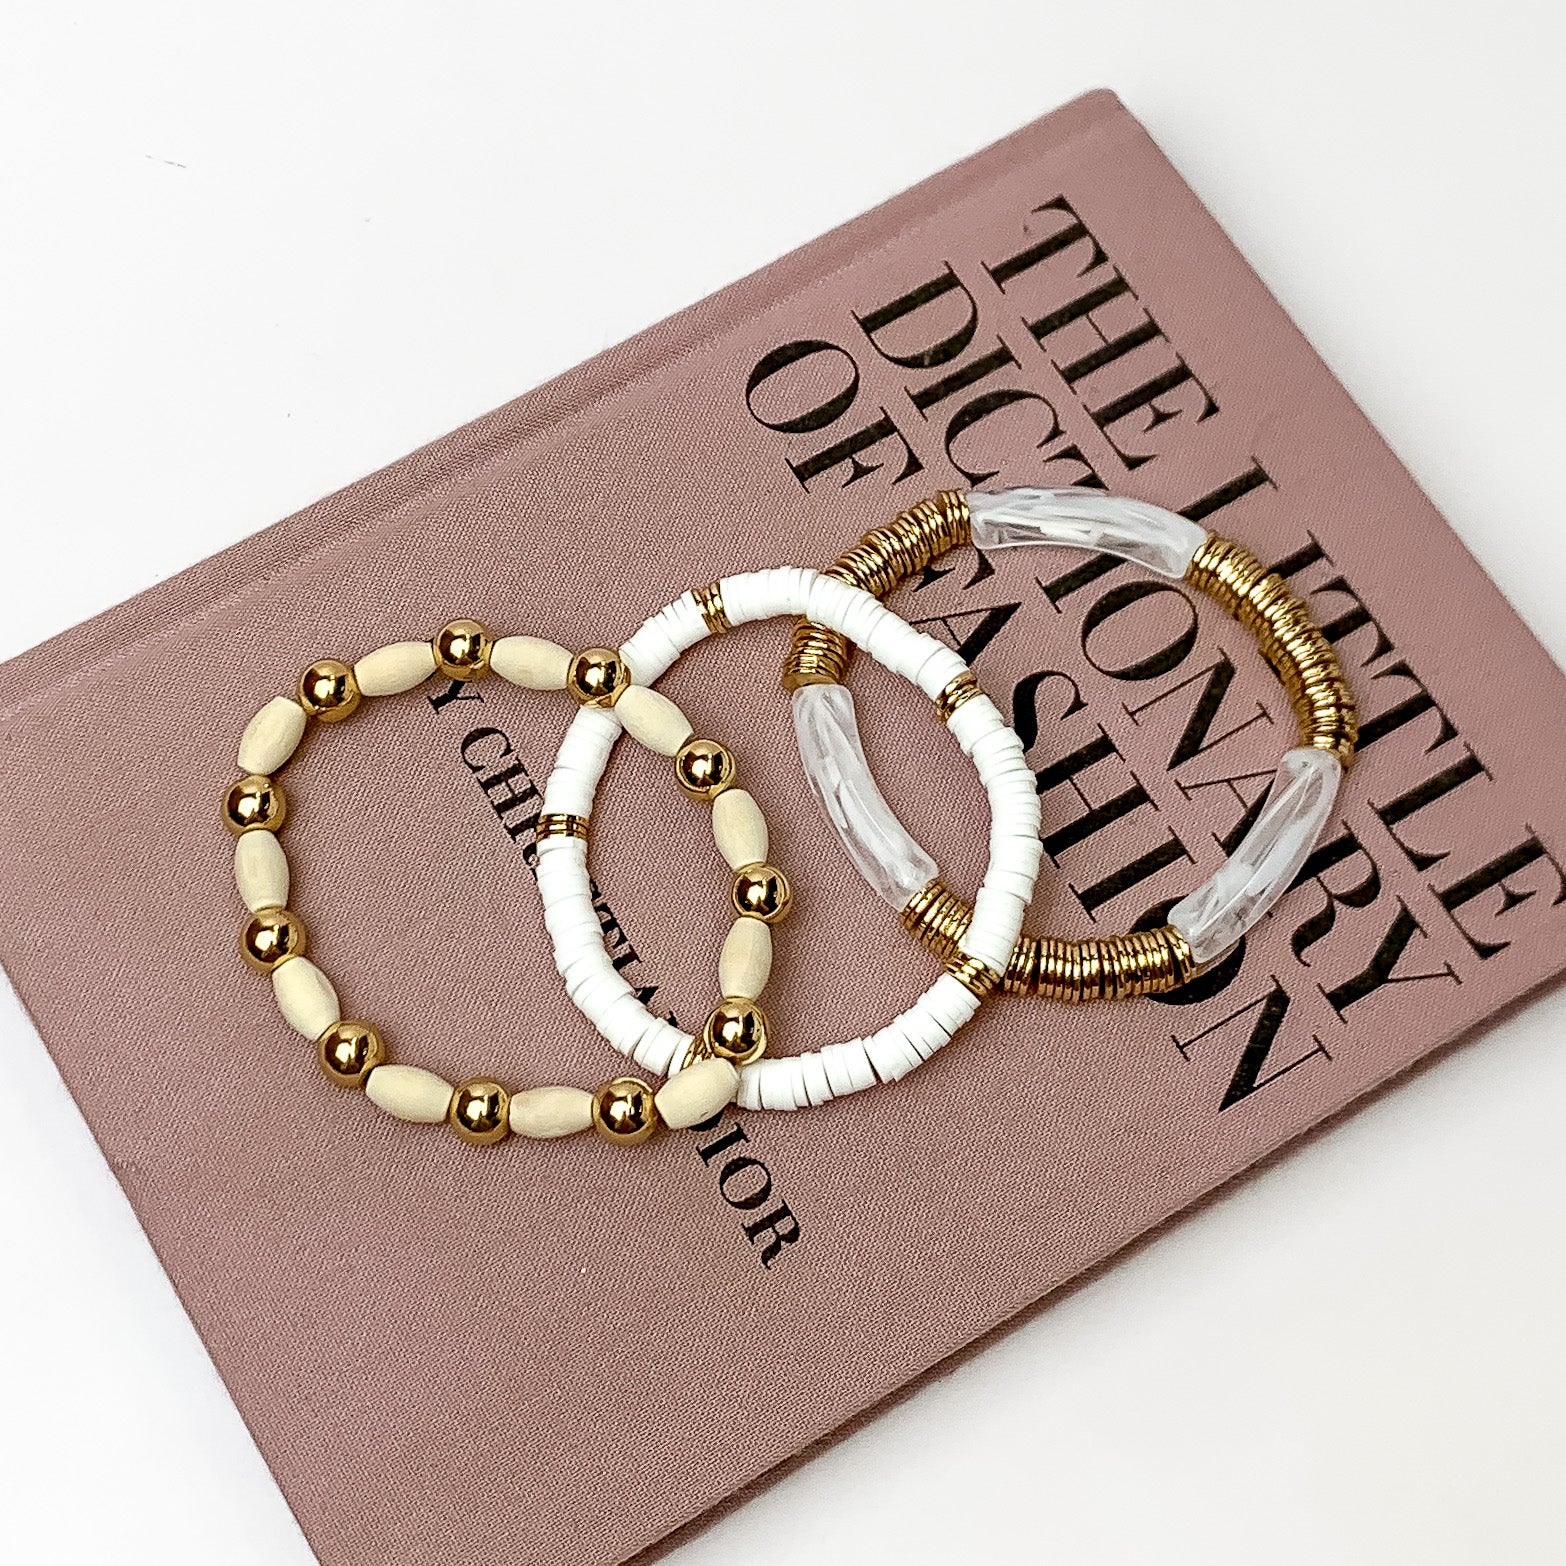 Set of Three | Goldie Goddess Tube and Beads Bracelet Set in White. Pictured on a white background with the bracelets laying on a book.